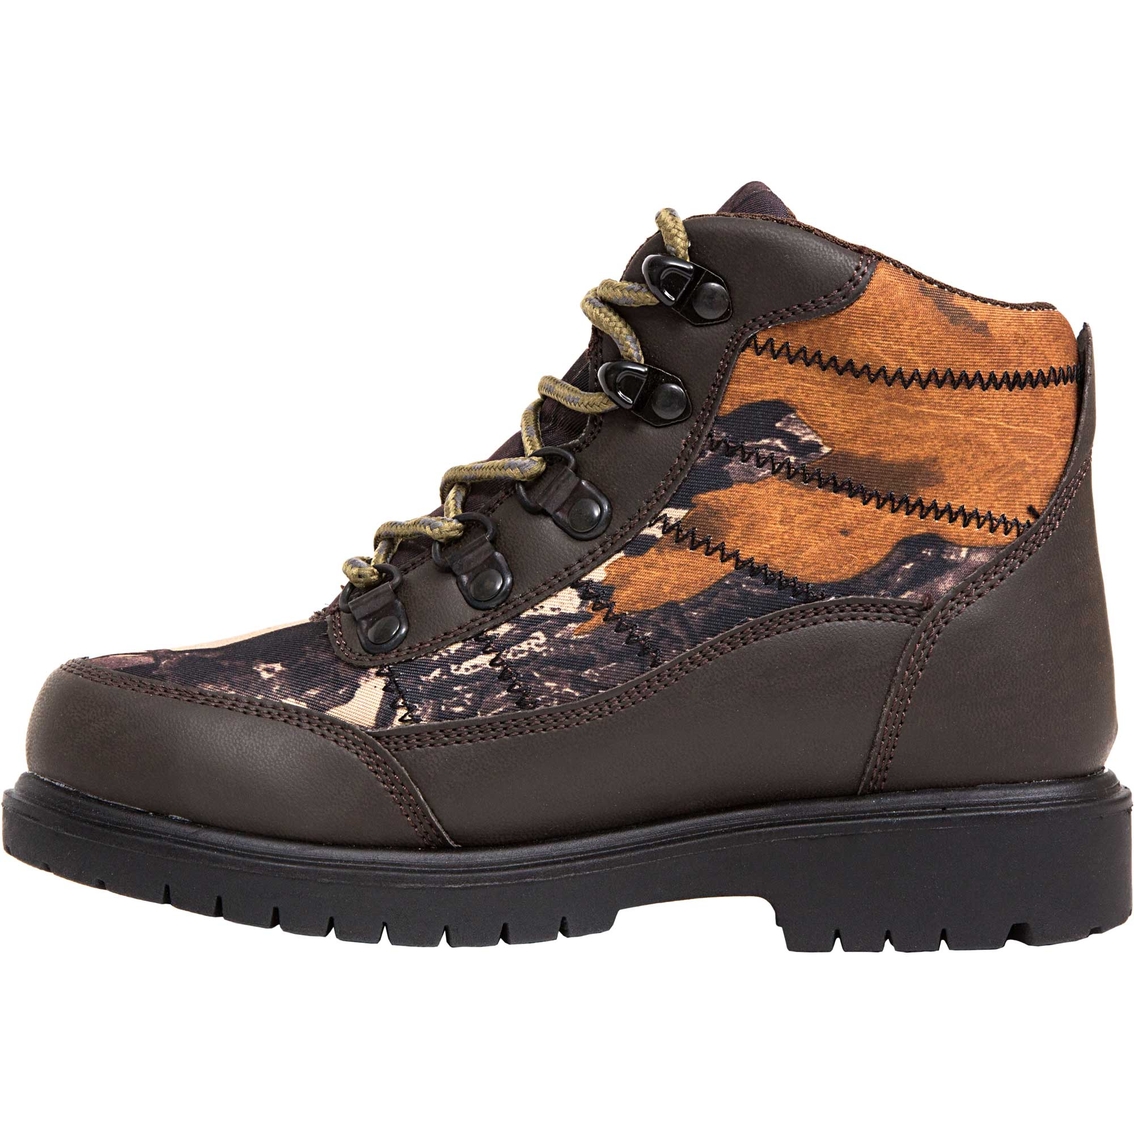 Deer Stags Boys Hunt Camo Boots - Image 4 of 6